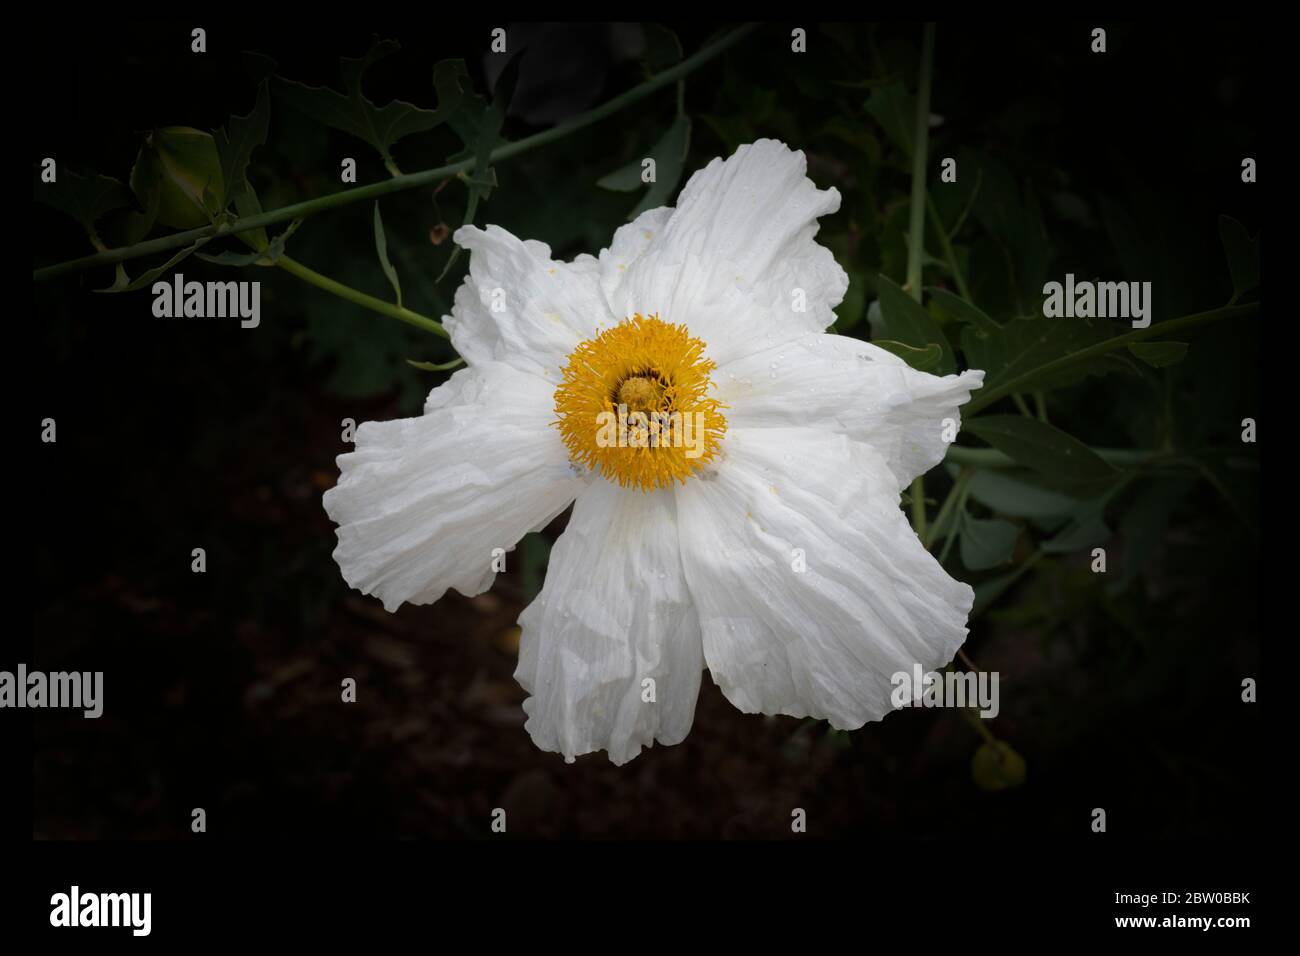 Delicate white flower with a yellow center, Californian Tree Poppy or Coulters Matilija Poppy flower (Romneya Coulteri) on a black background. Stock Photo